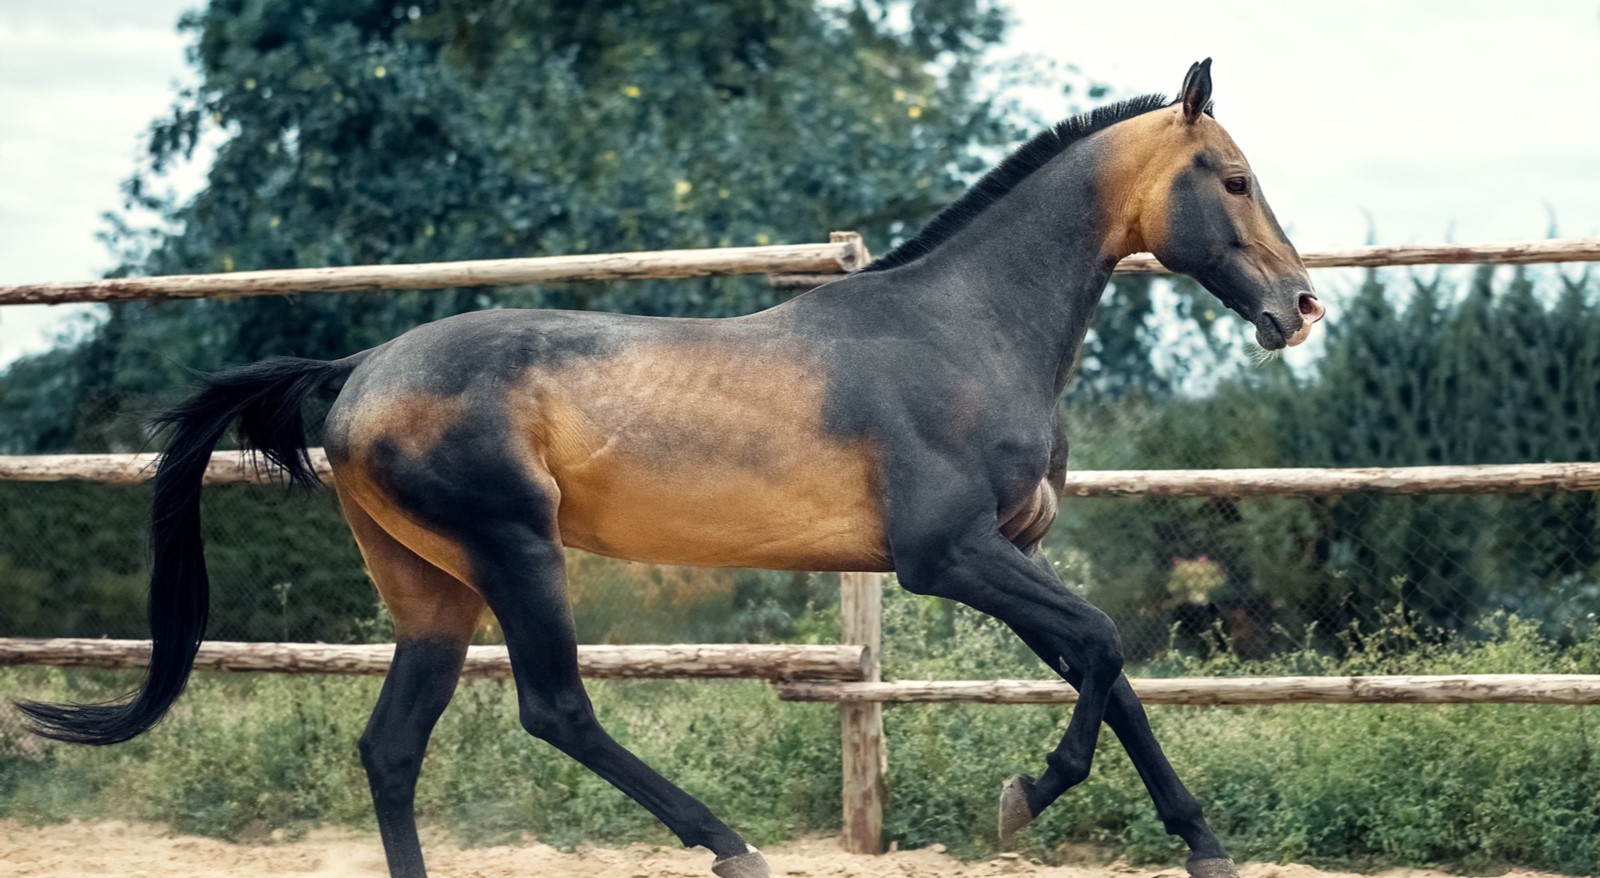 Rare horse breeds that are critically endangered